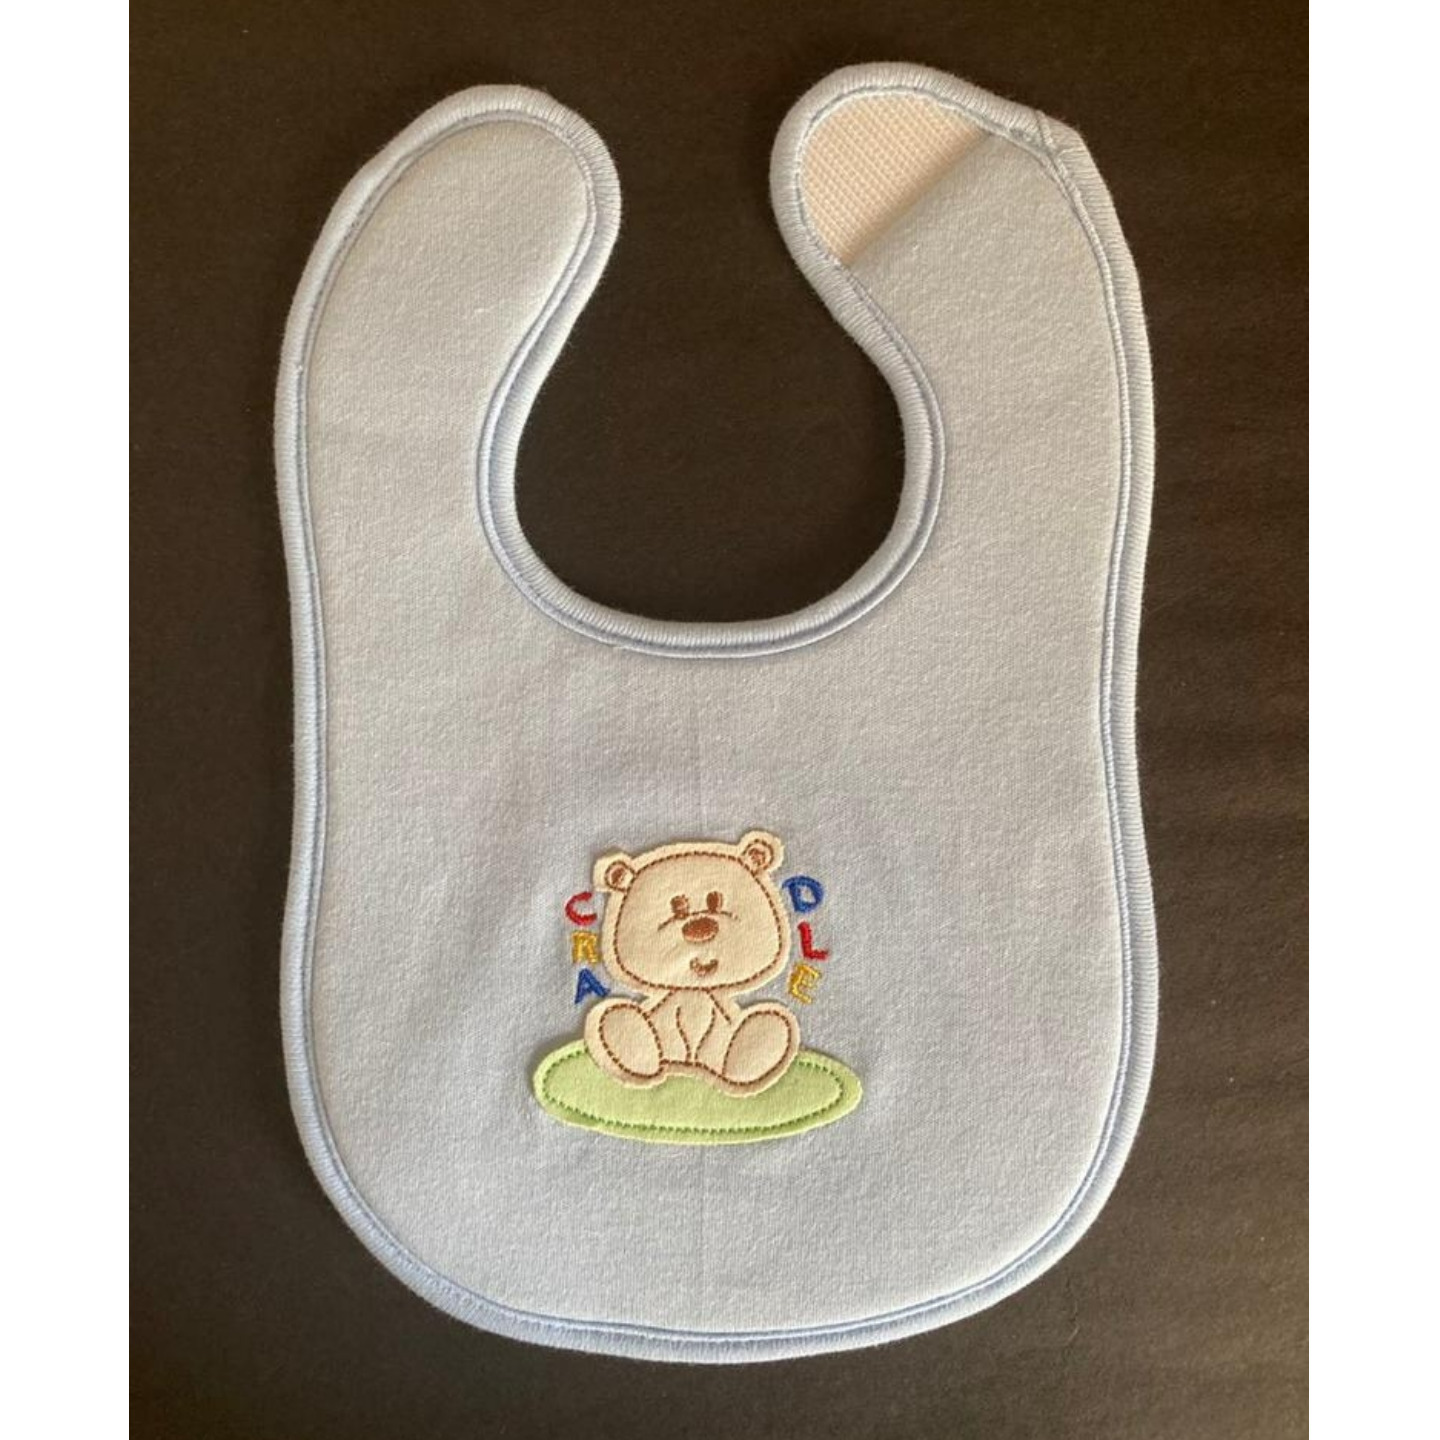 Cradle Togs Newborn Baby Bibs Rs 160 Only